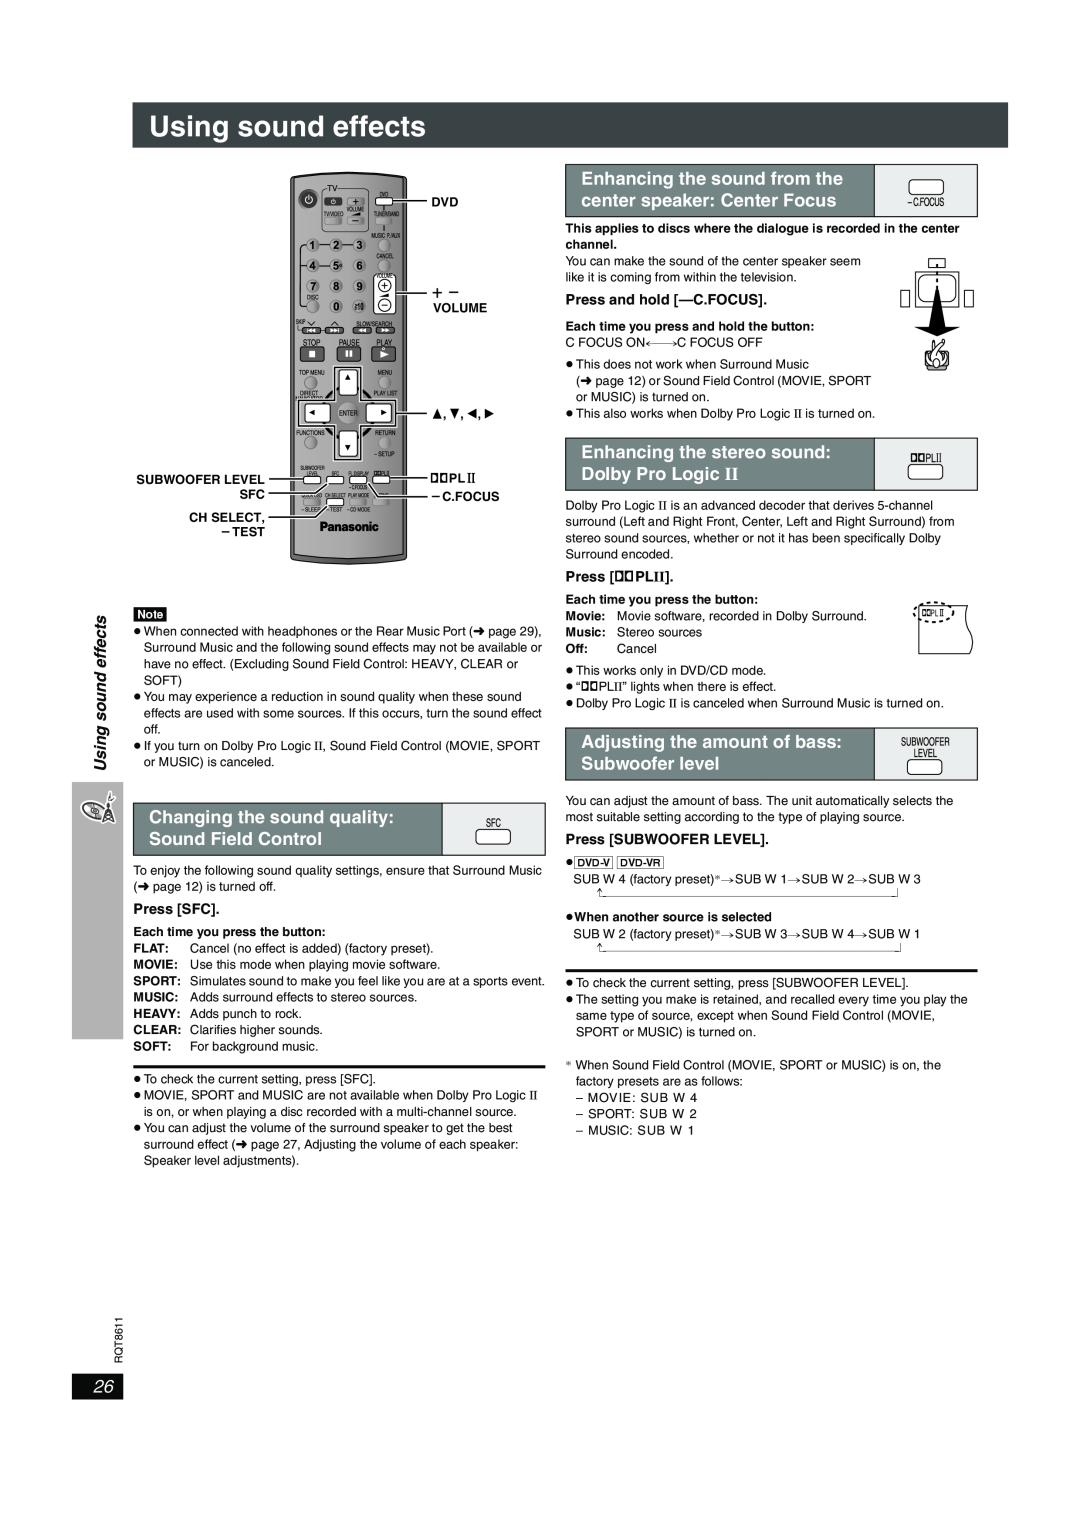 Panasonic SC-HT640W manual Using sound effects, Enhancing the sound from the, center speaker Center Focus 